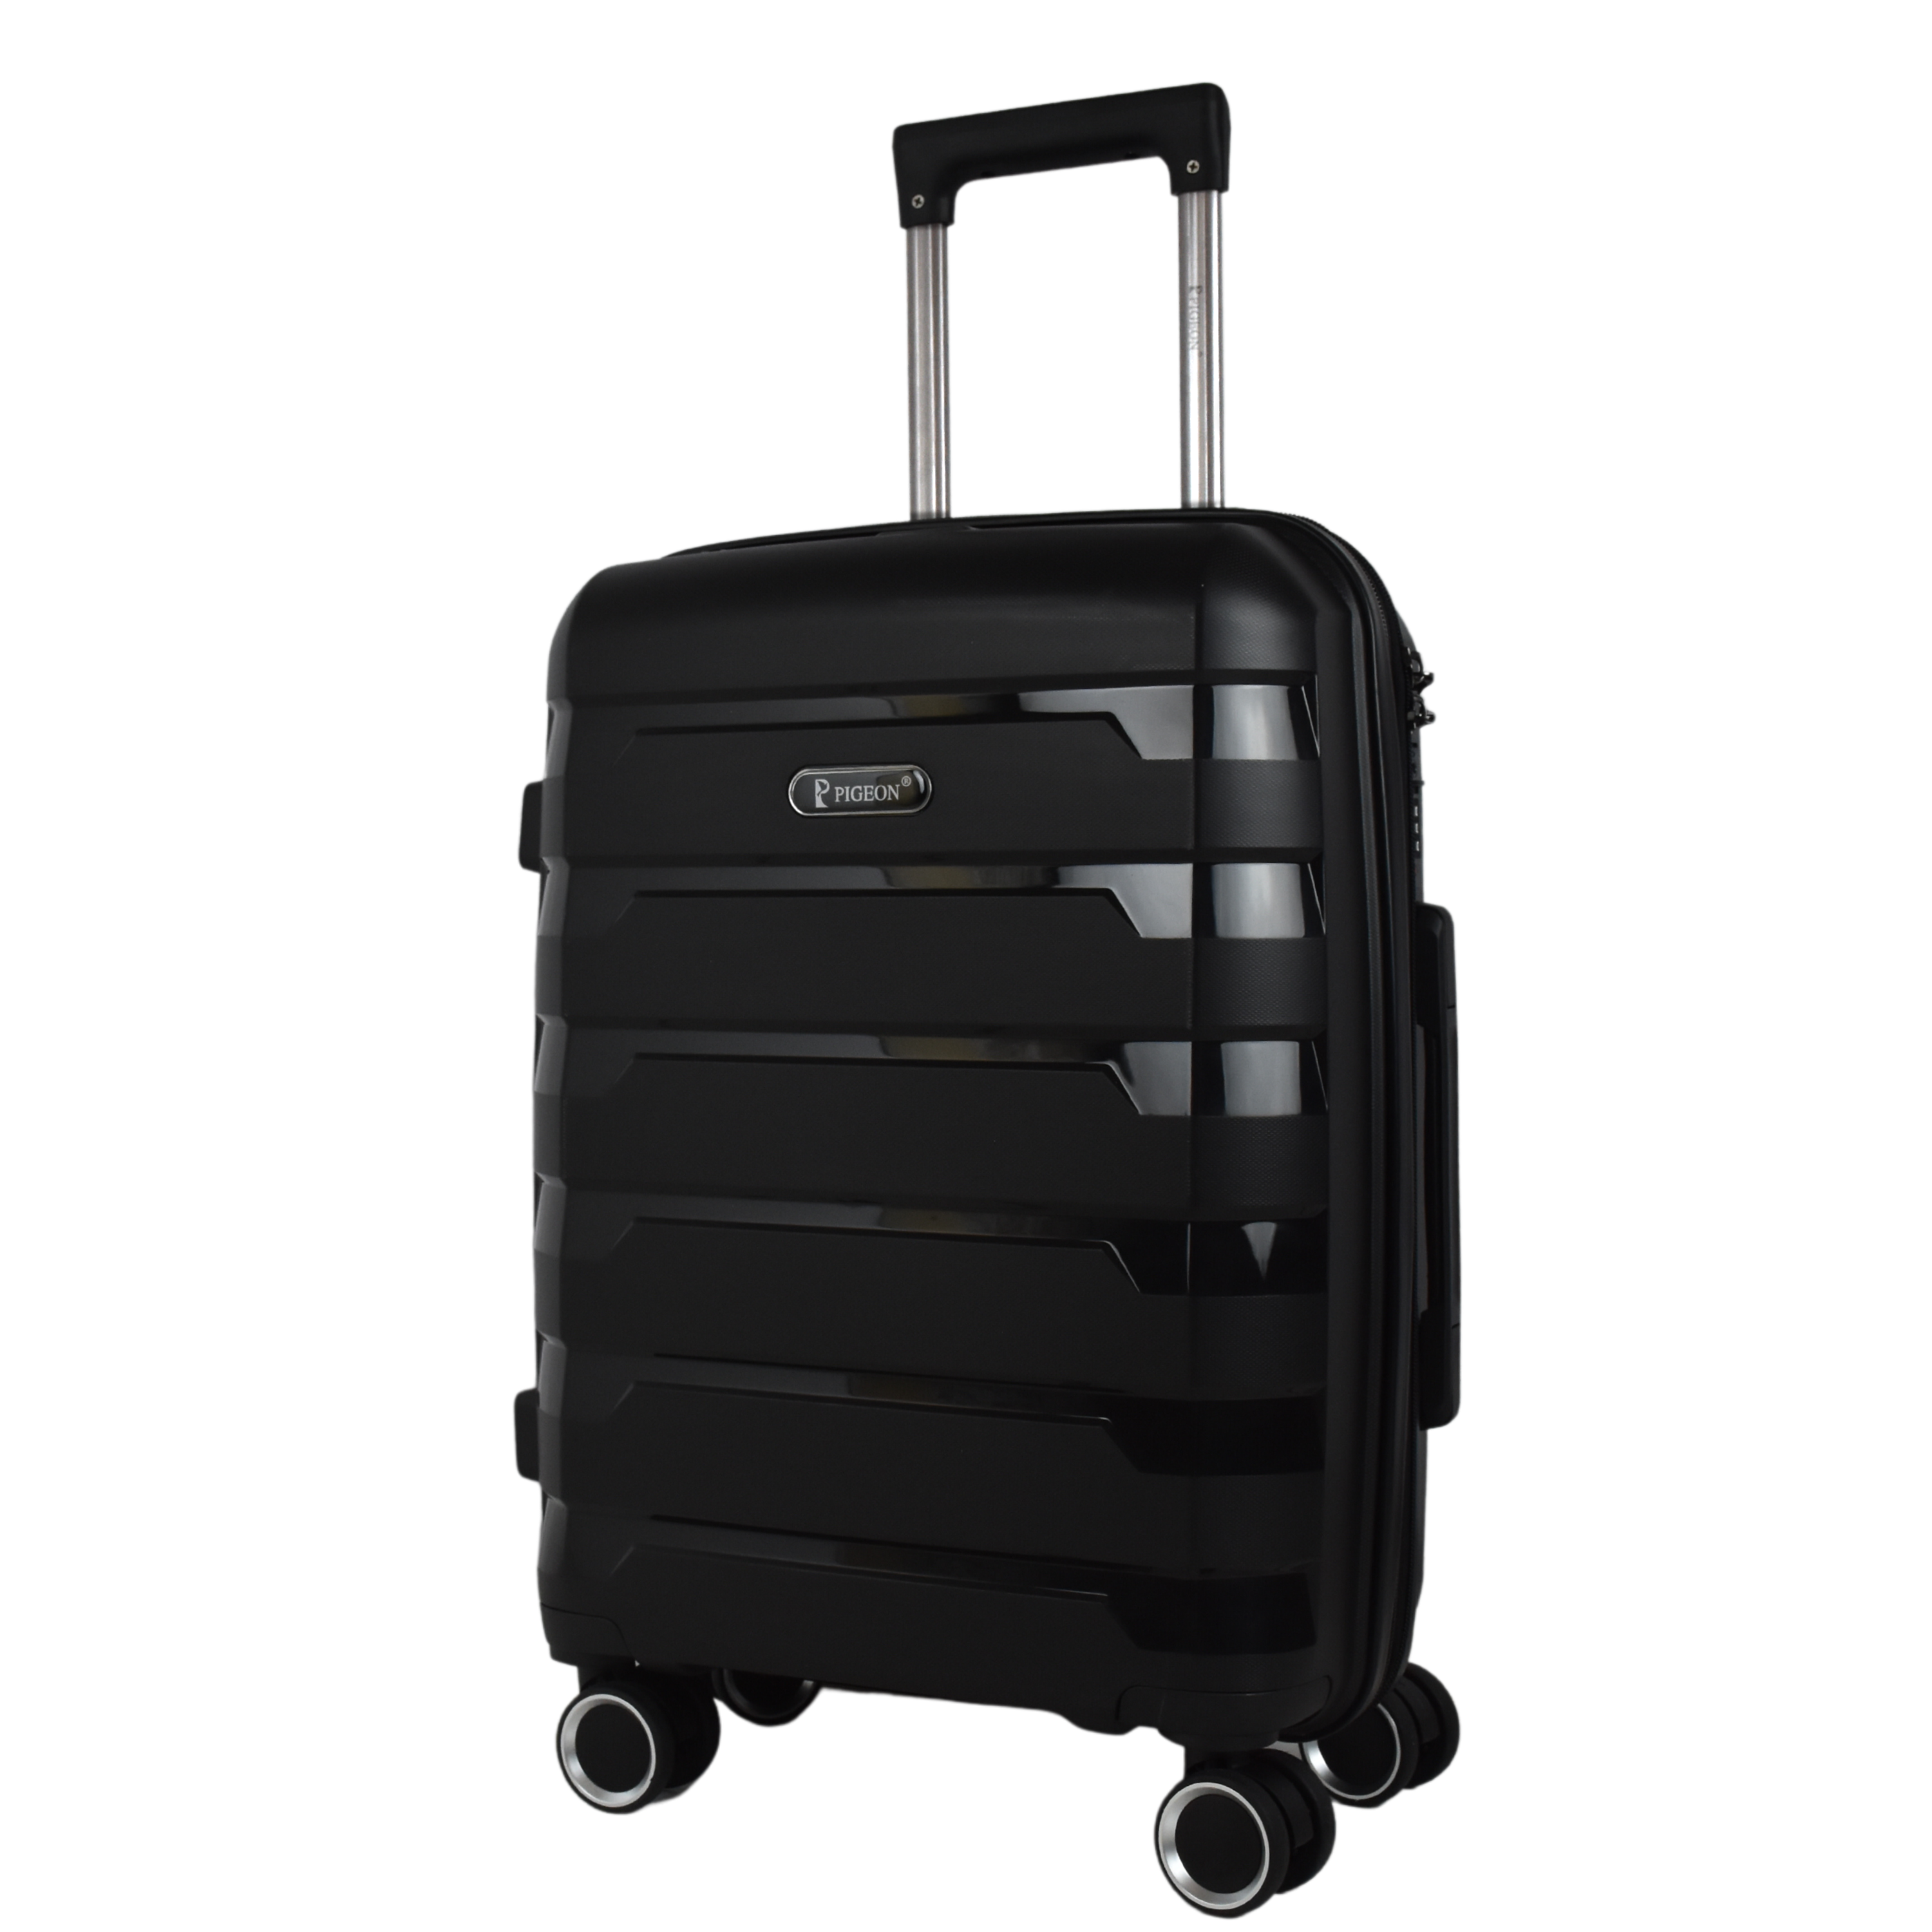 PIGEON New black Luggage 24 Inch PP with protector